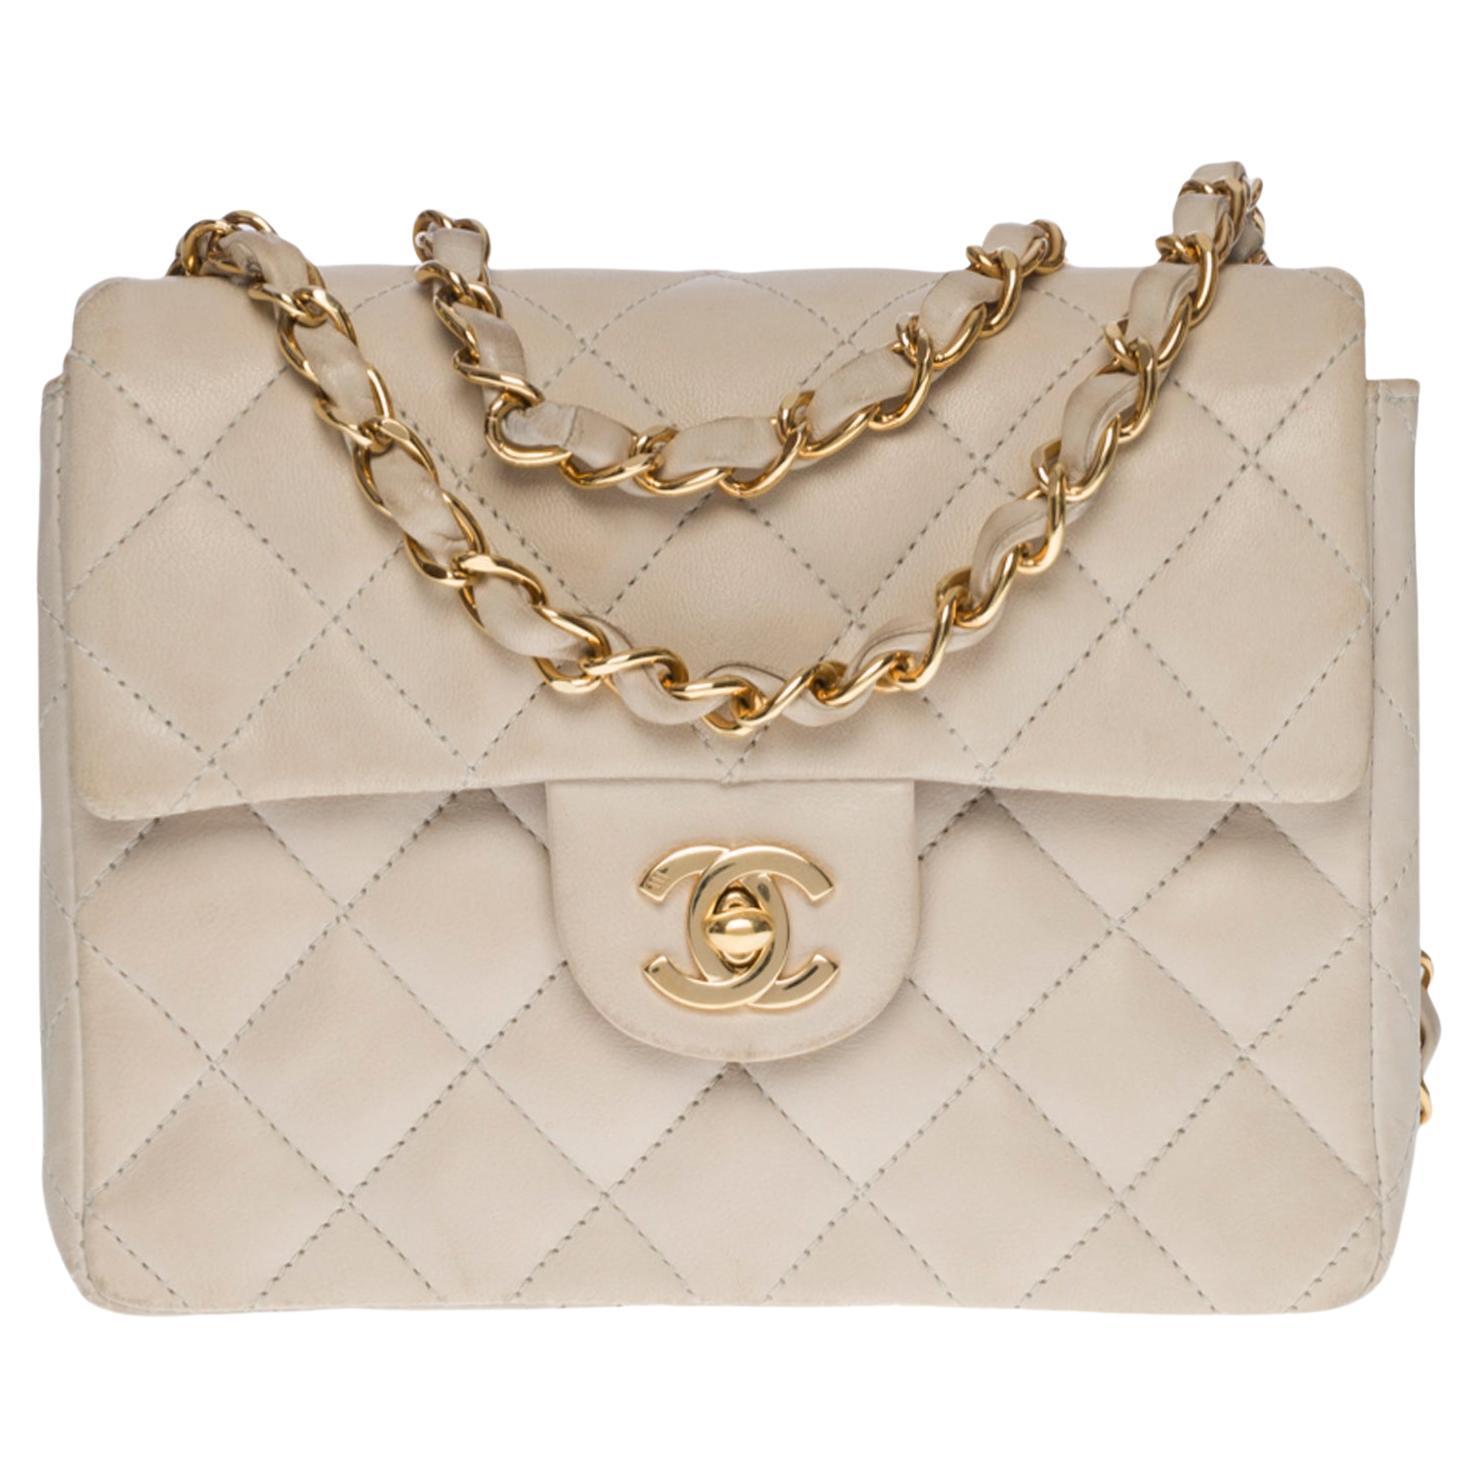 Chanel Mini Timeless flap shoulder bag in ecru quilted lambskin